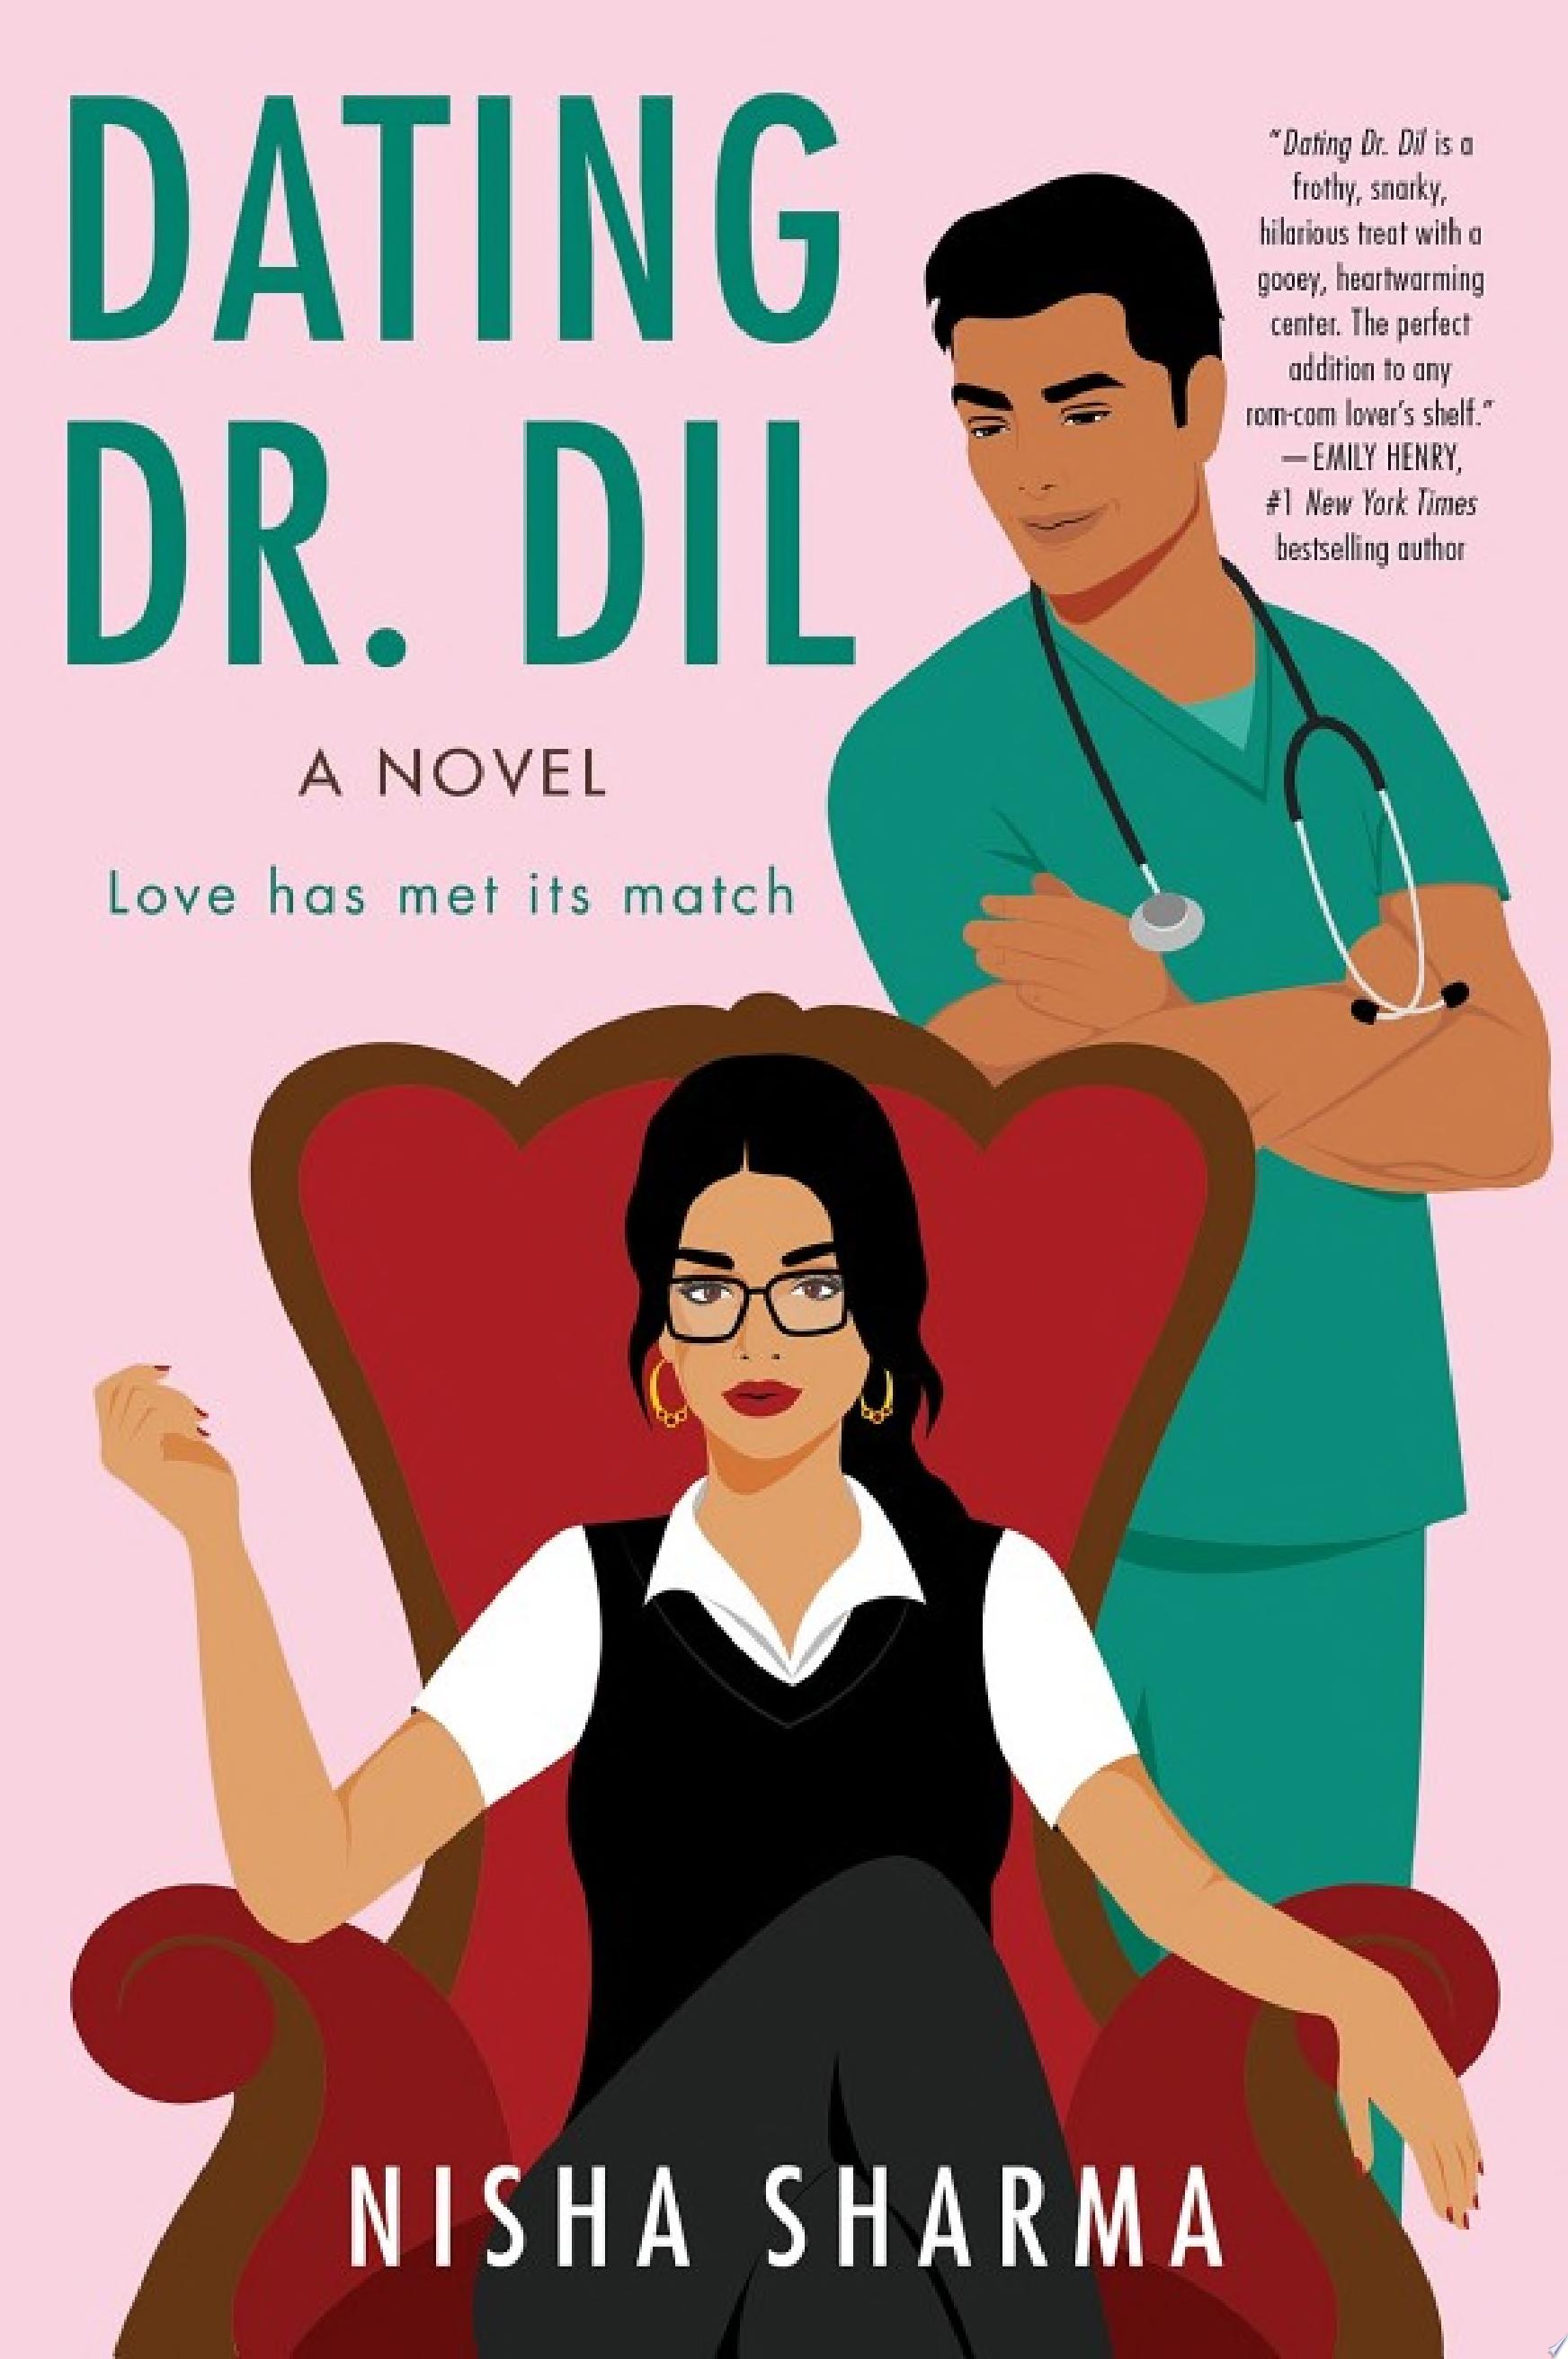 Image for "Dating Dr. Dil"